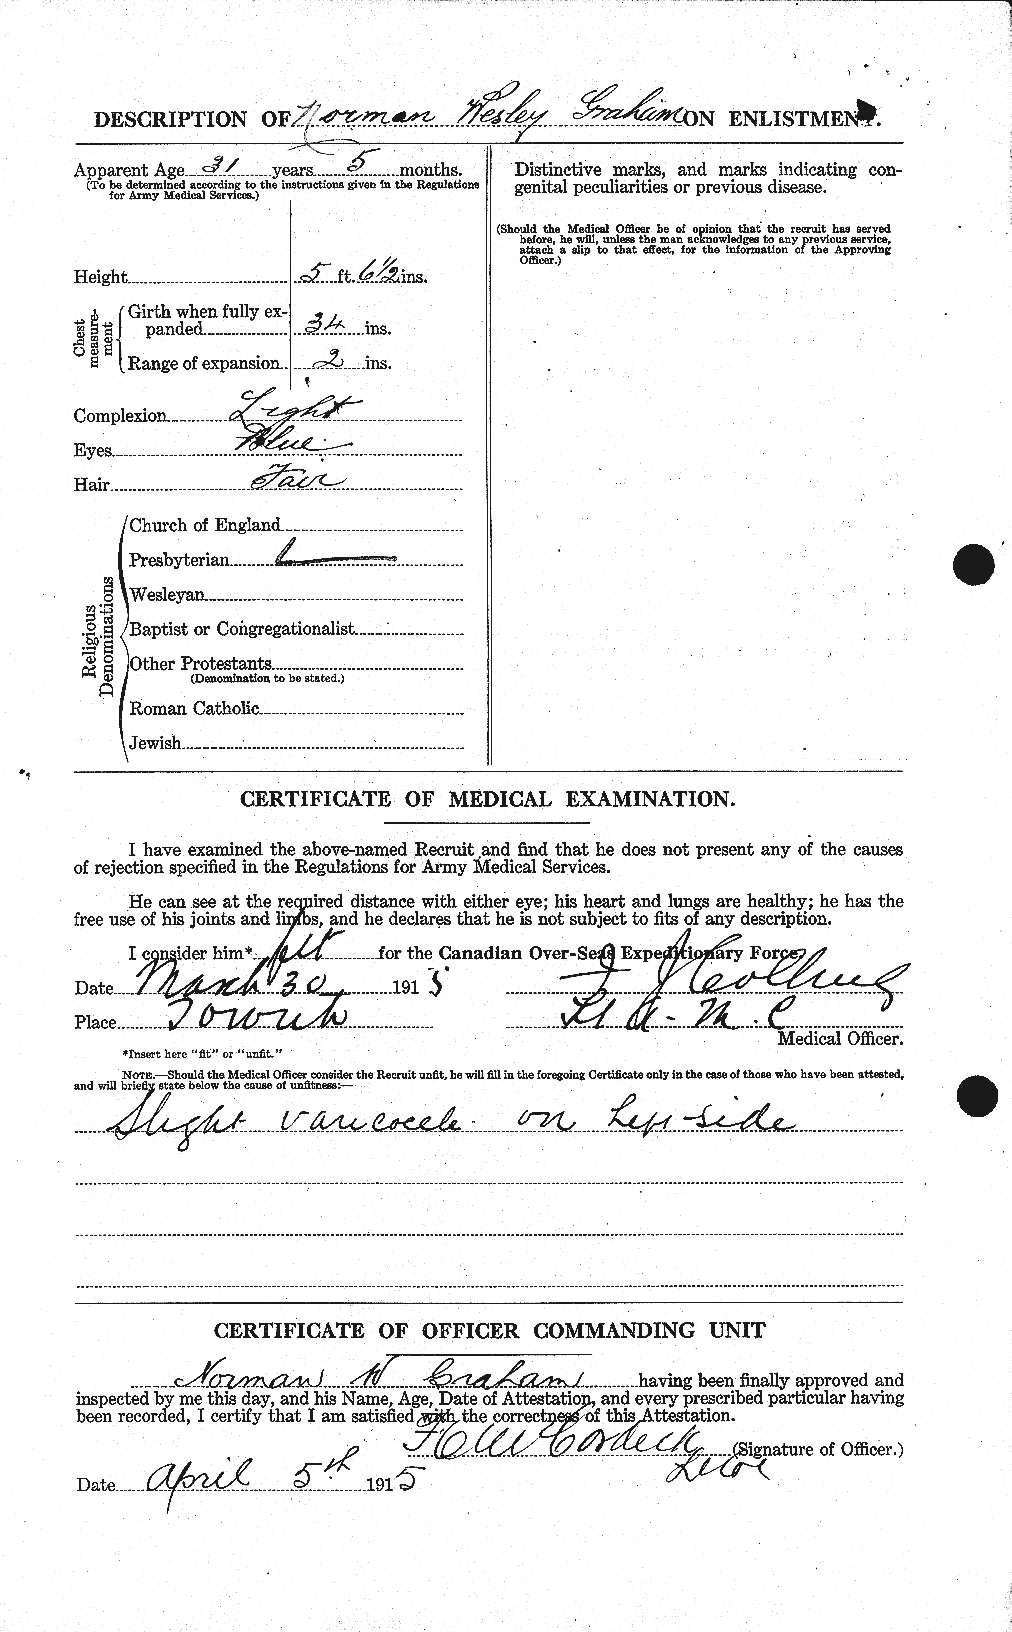 Personnel Records of the First World War - CEF 359327b